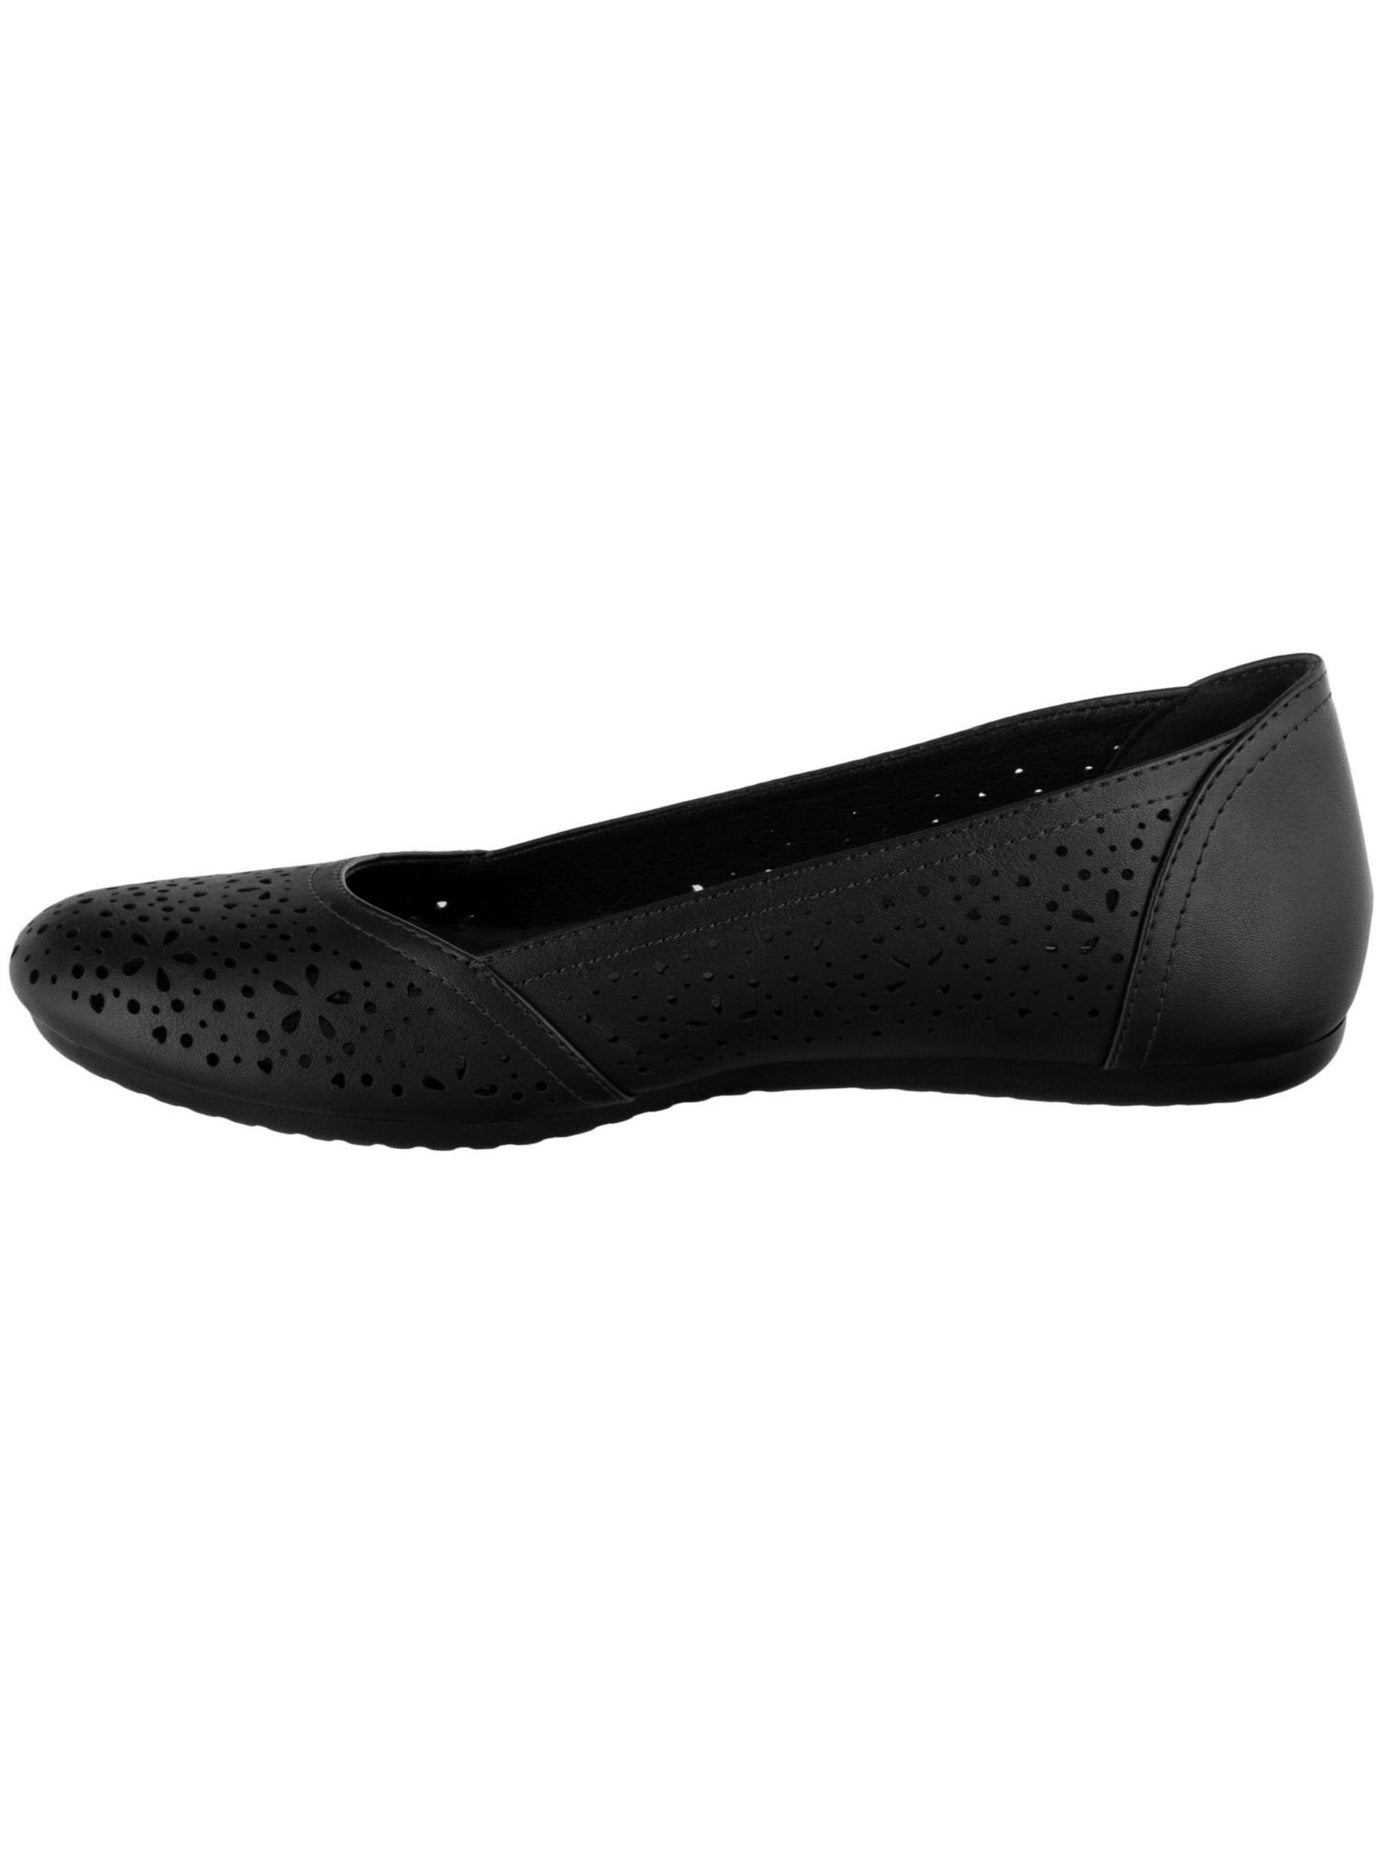 EASY MOTION Womens Black Perforated Cushioned Brooklyn Round Toe Slip On Ballet Flats 8.5